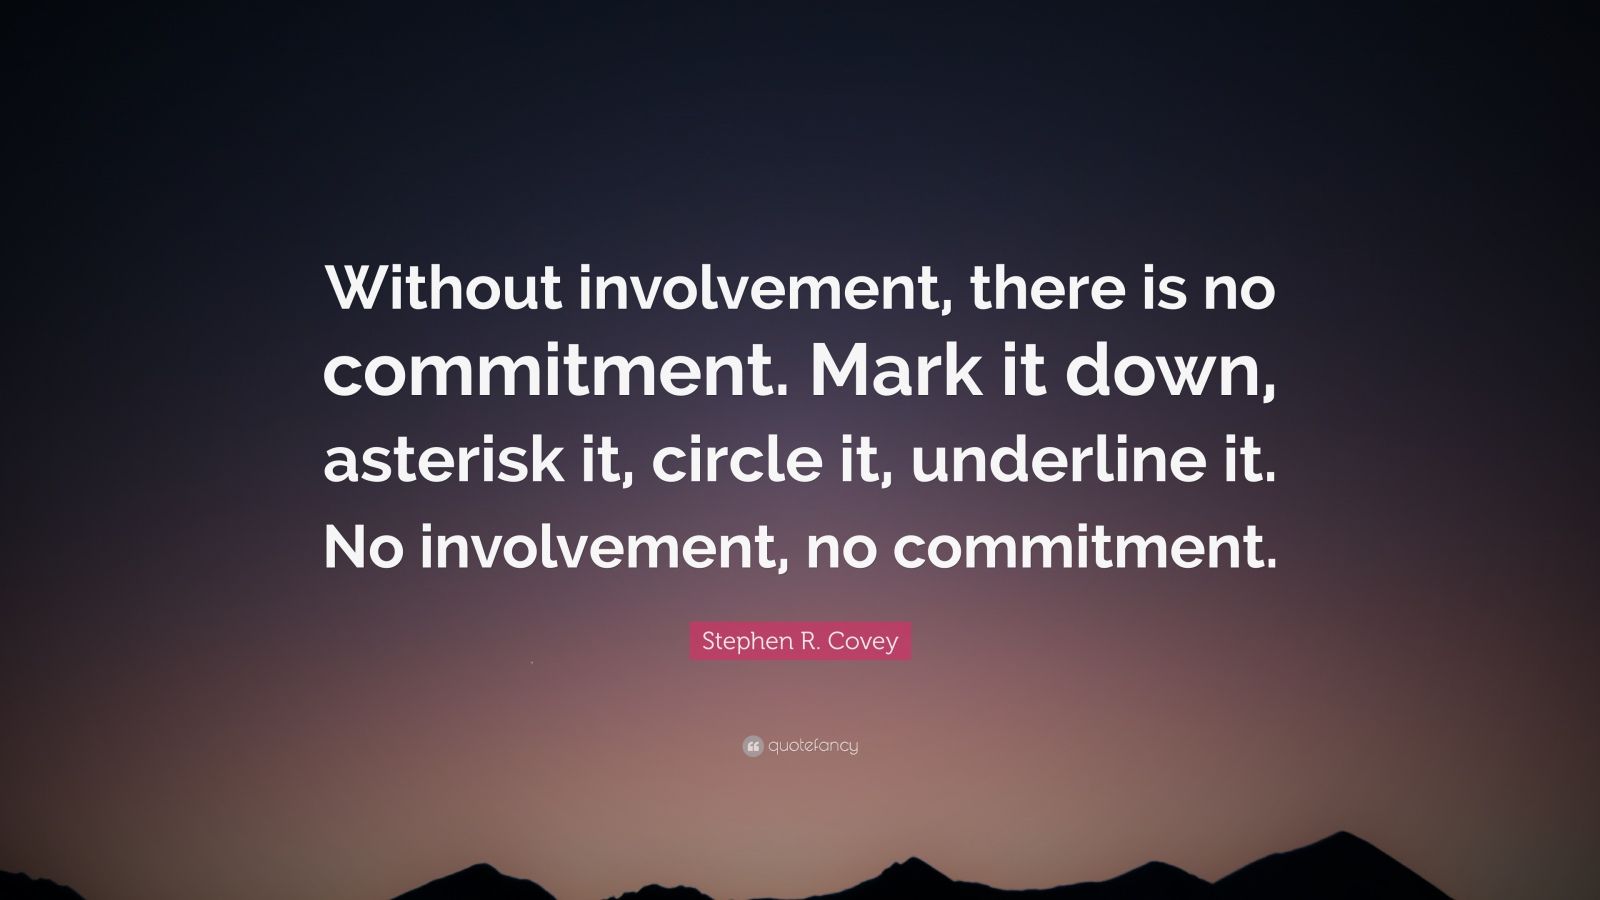 Stephen R. Covey Quote: “Without involvement, there is no commitment